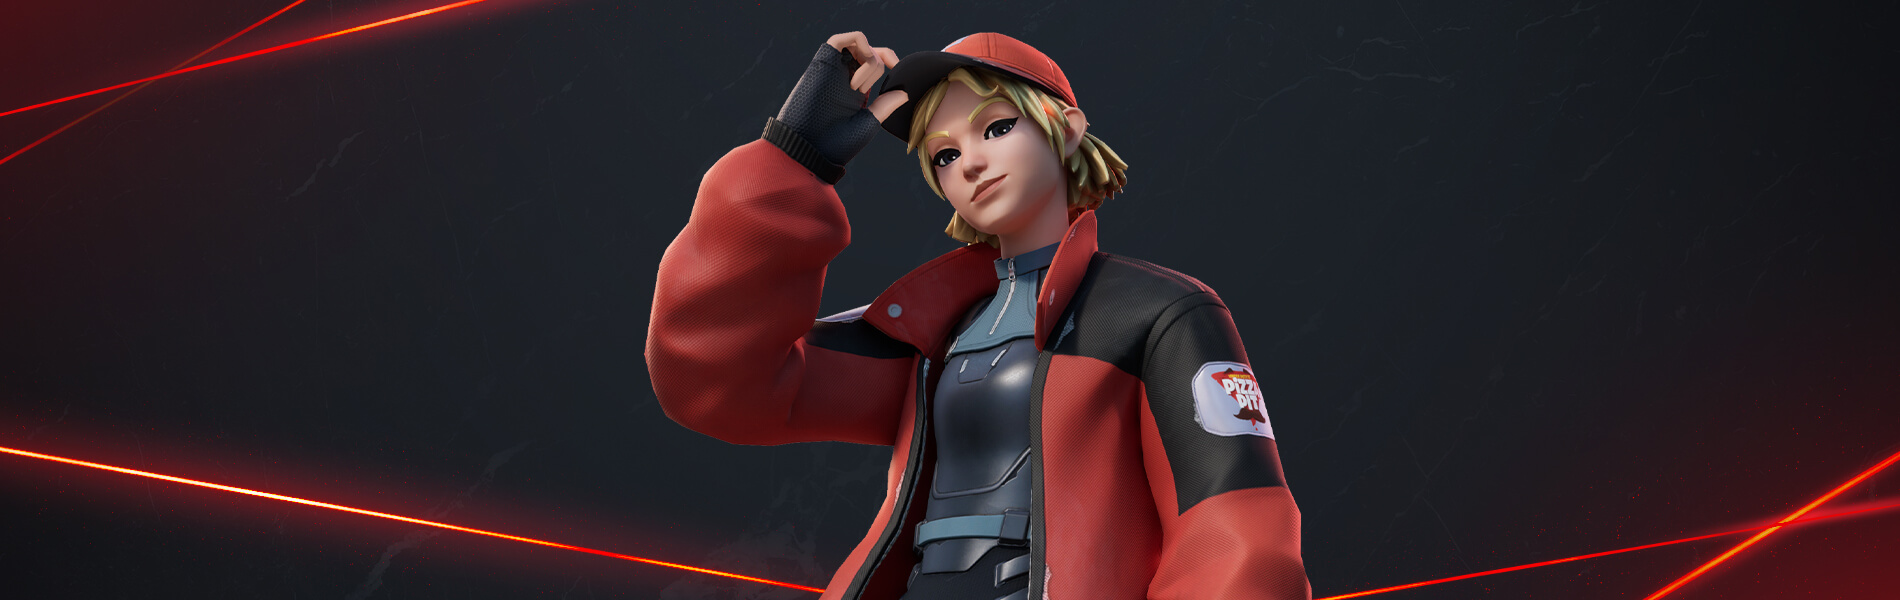 fortnite-piper-pace-outfit-1900x600-4f099a96a4b9